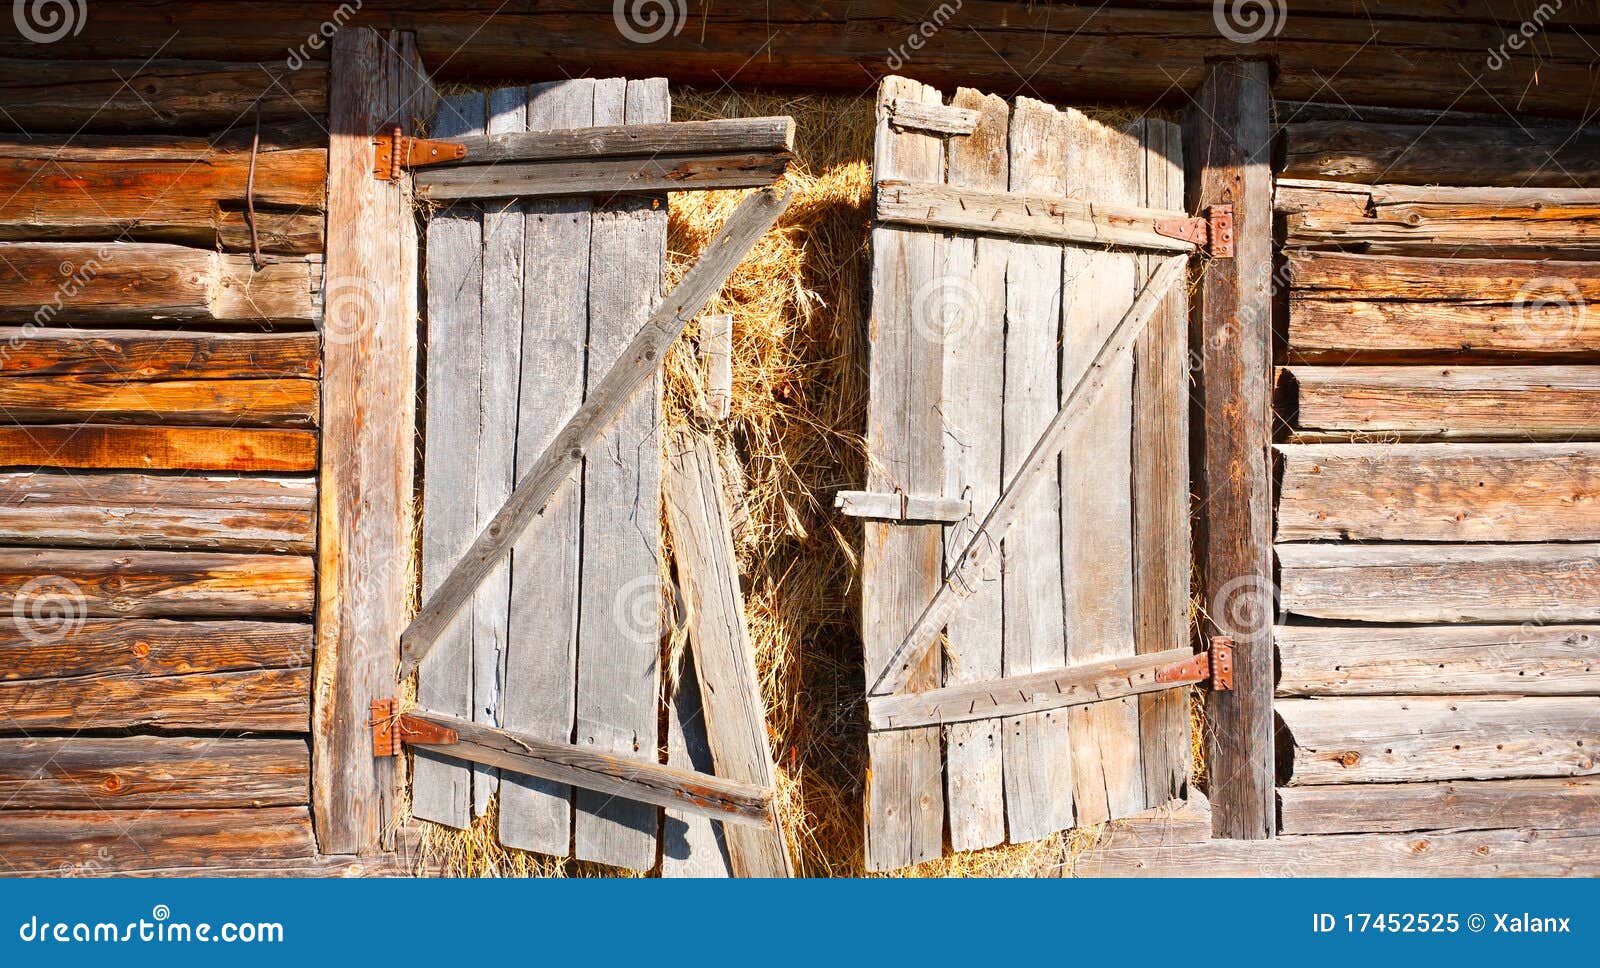 Door Of A Traditional Romanian Barn Stock Image - Image 